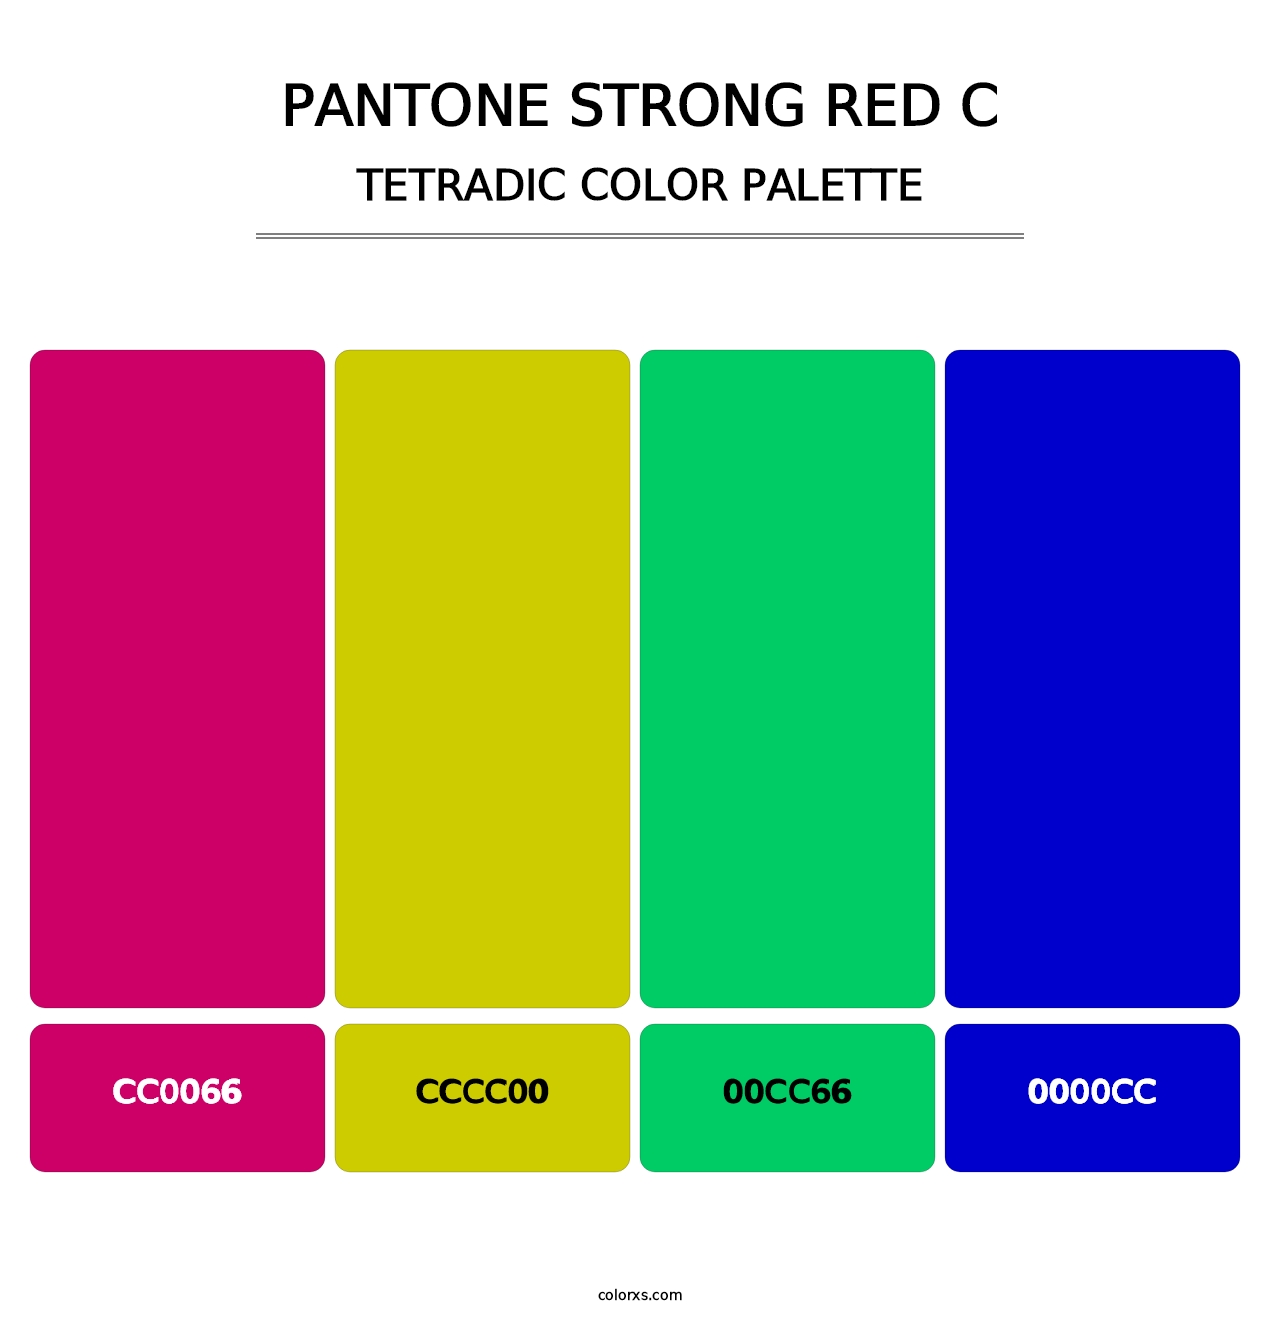 PANTONE Strong Red C - Tetradic Color Palette